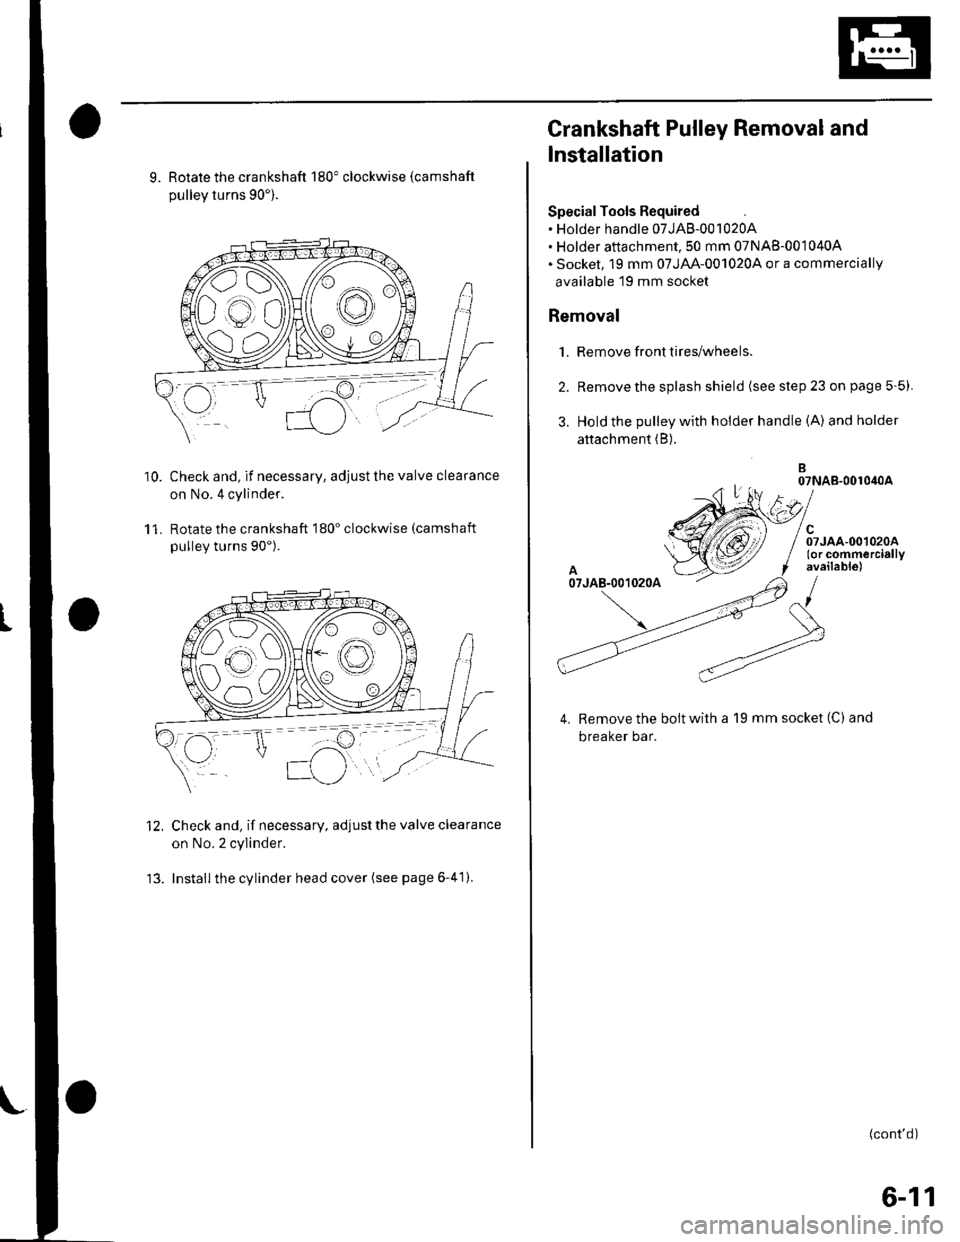 HONDA CIVIC 2003 7.G Workshop Manual 10.
9. Rotate the crankshaft 180" clockwise (camshaft
pullev turns 90).
Check and, if necessary, adjust the valve clearance
on No.4 cylinder.
Rotate the crankshaft 180" clockwise (camshaft
pulley tur